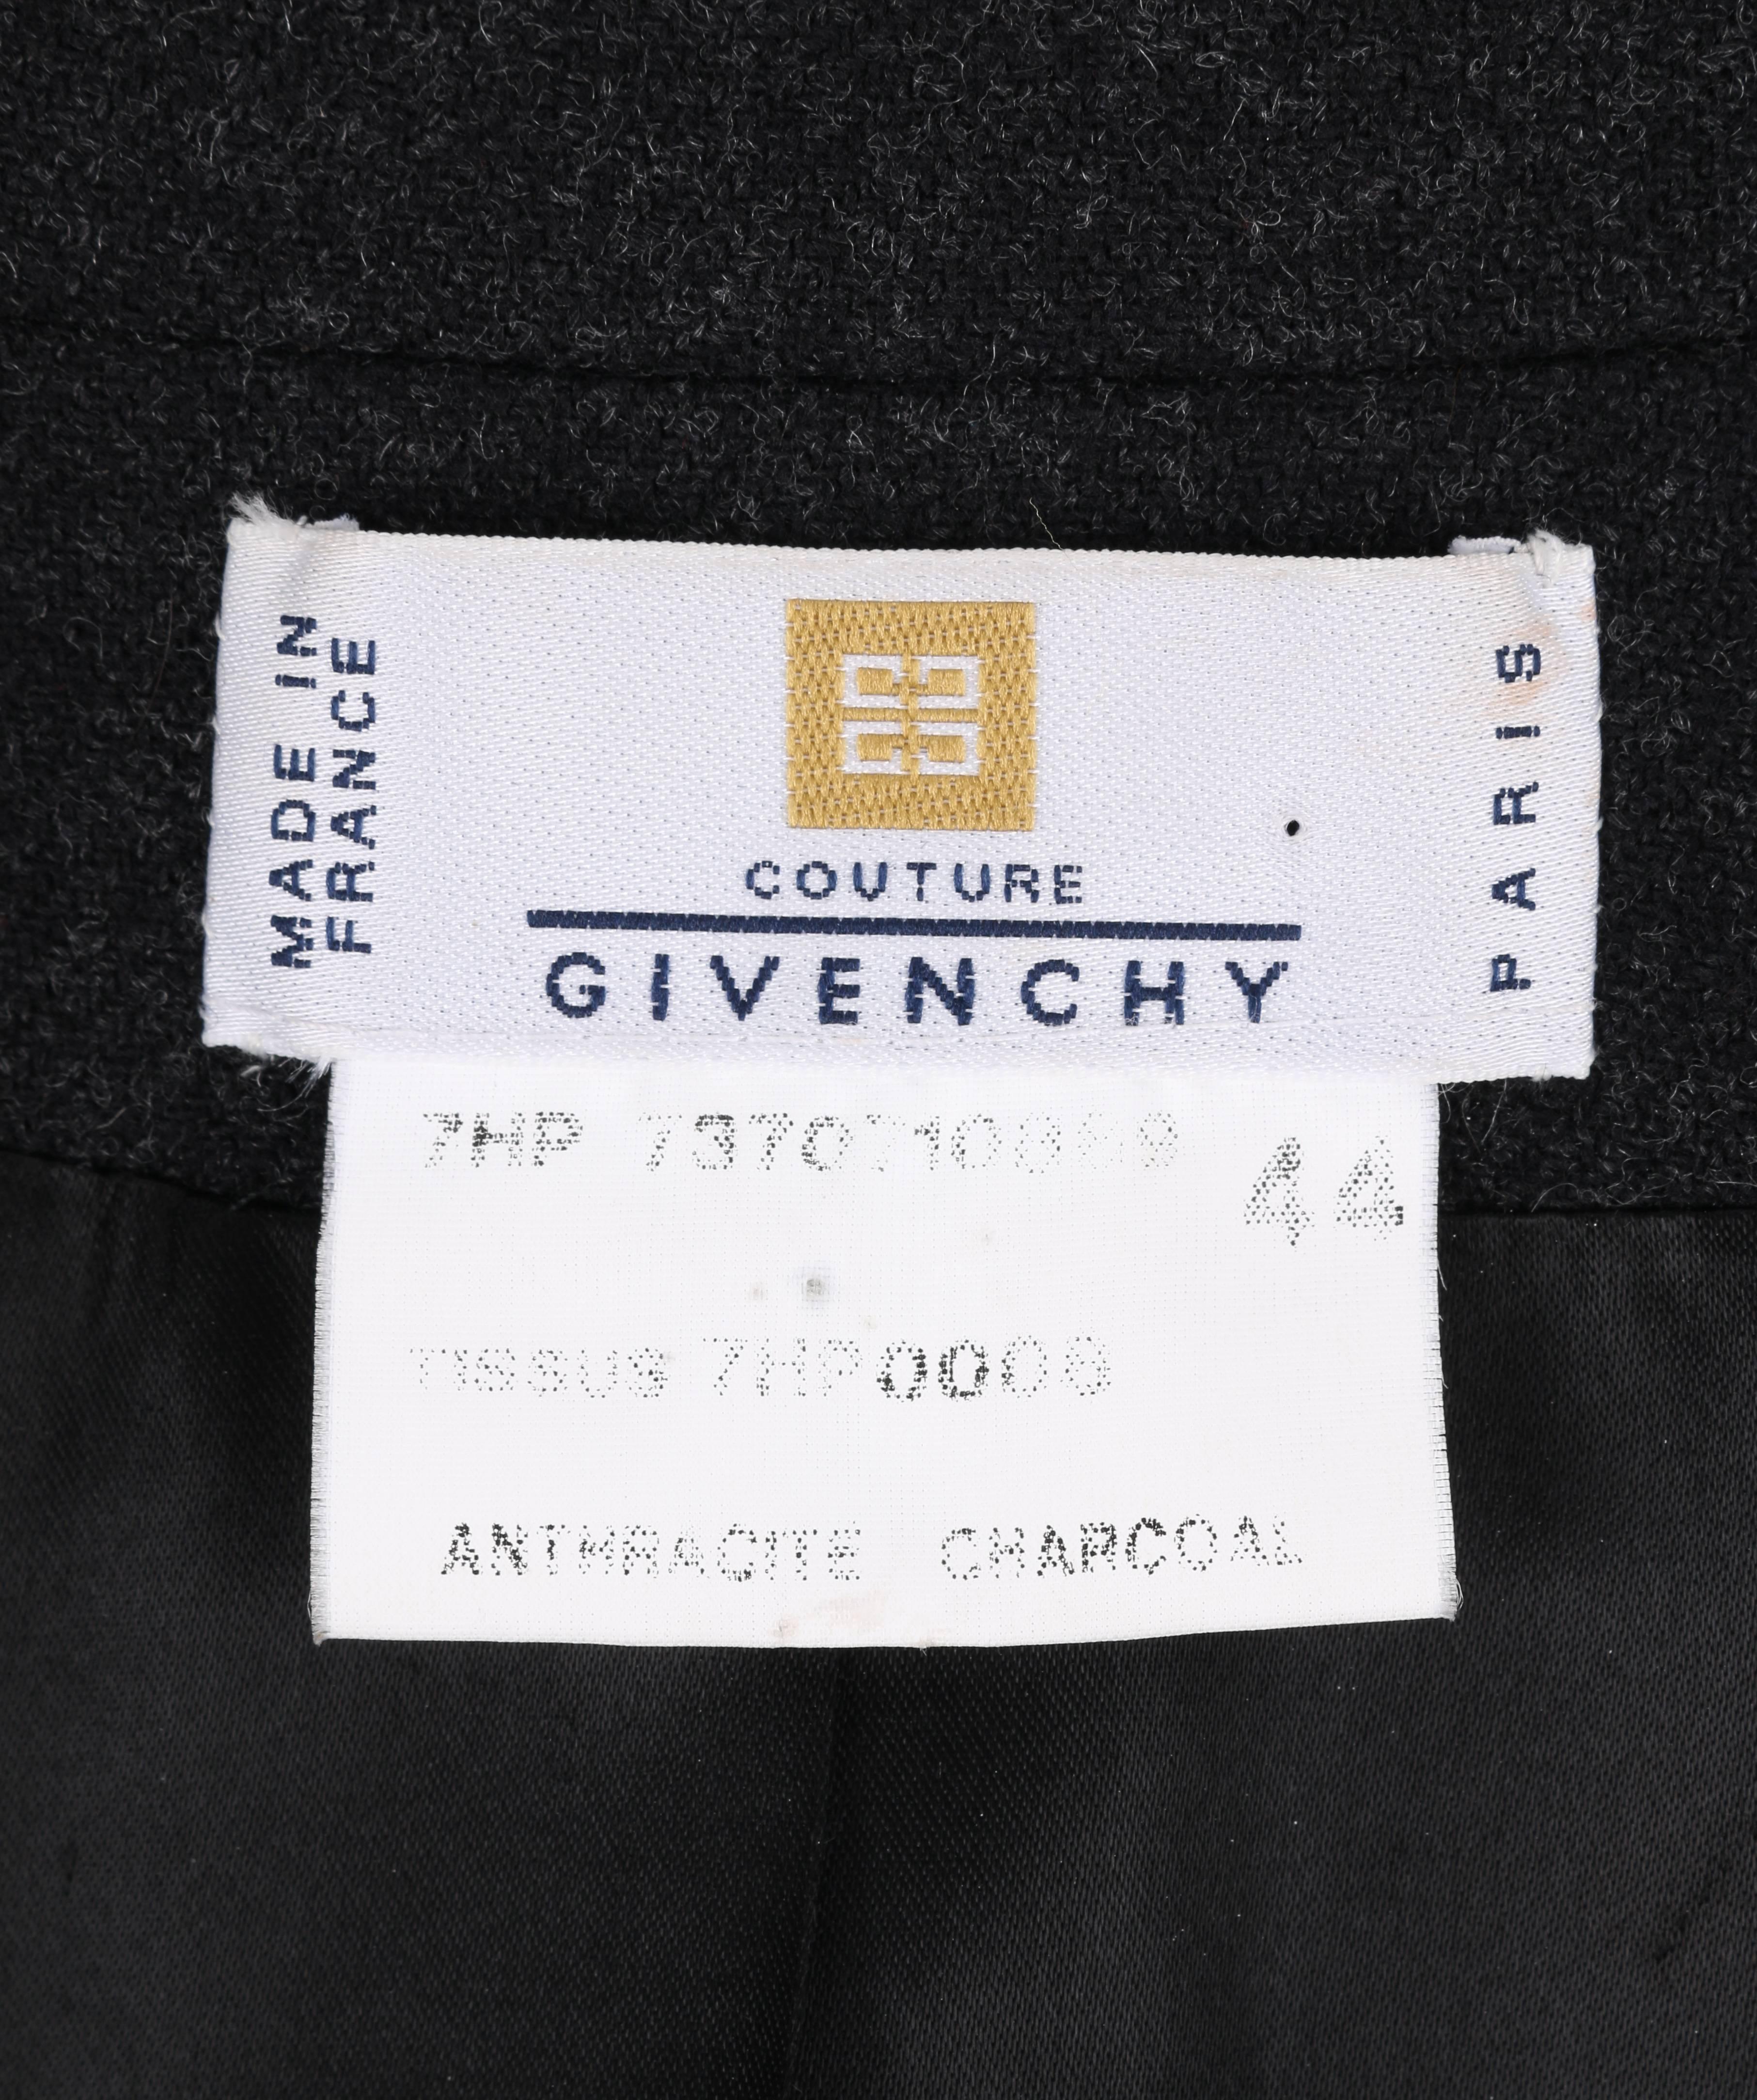 GIVENCHY Couture A/W 1998 ALEXANDER McQUEEN Charcoal Gray Wool Coat Overcoat For Sale 2